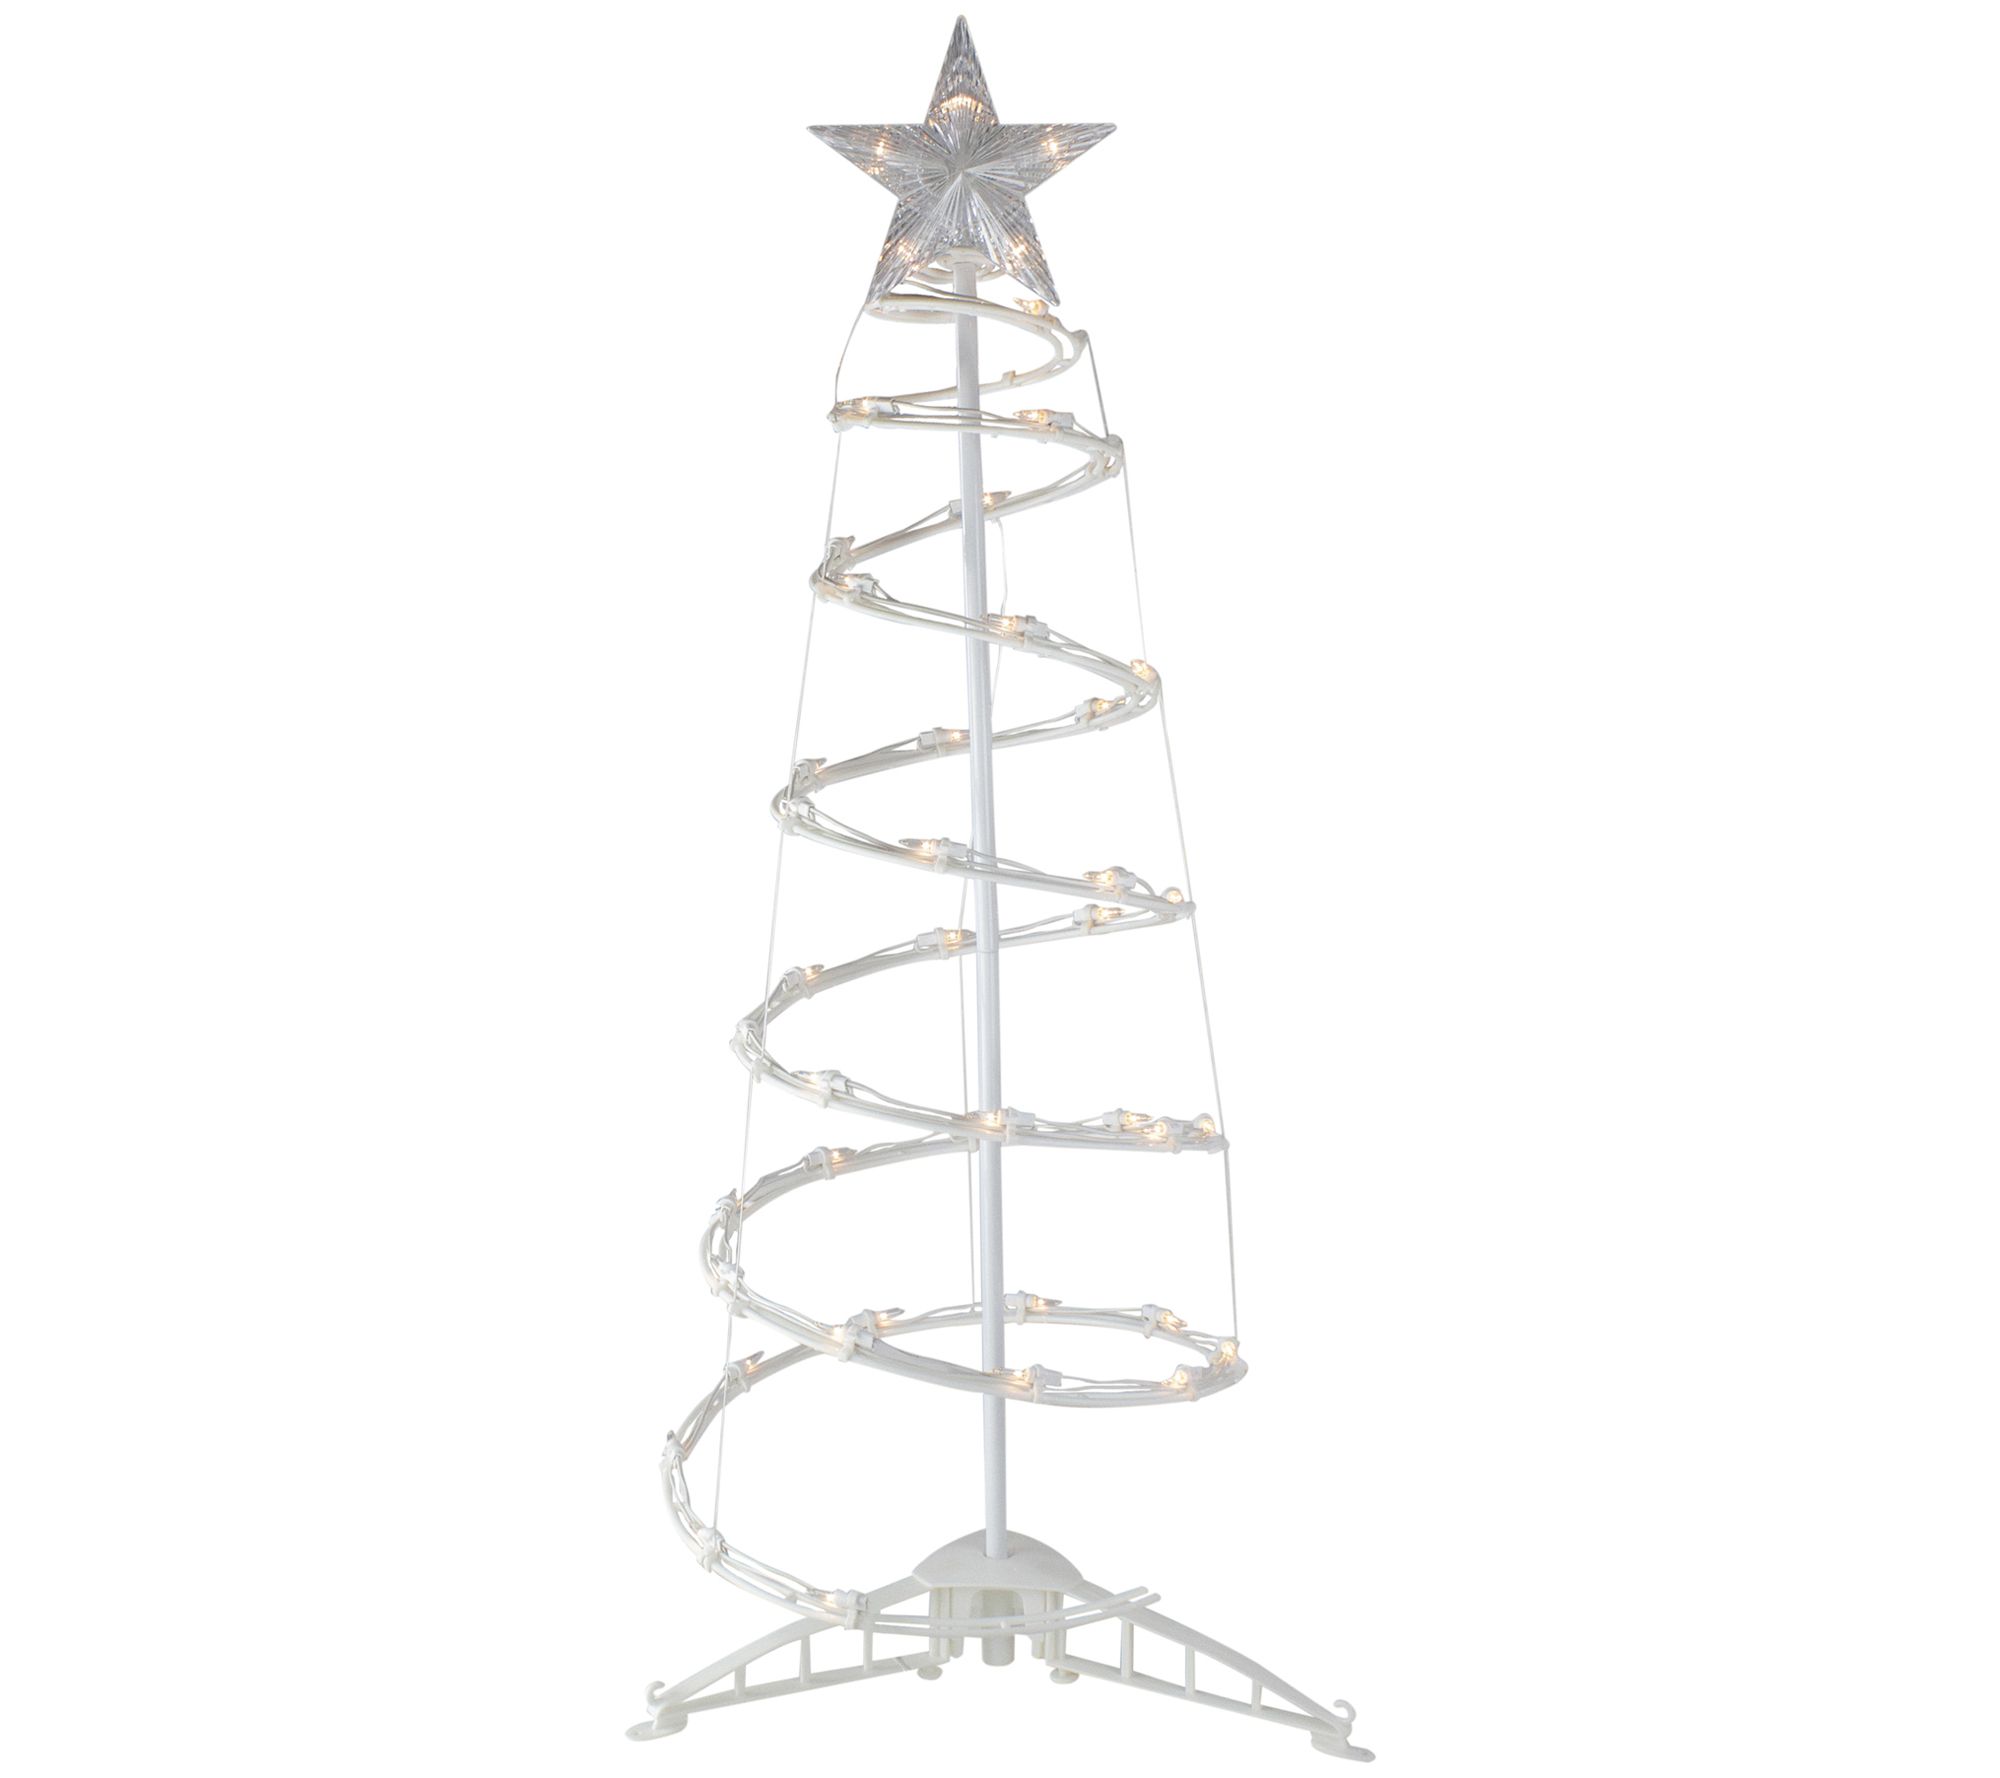 Northlgiht 3' Lighted Spiral Cone Tree Outdoor Decoration - QVC.com